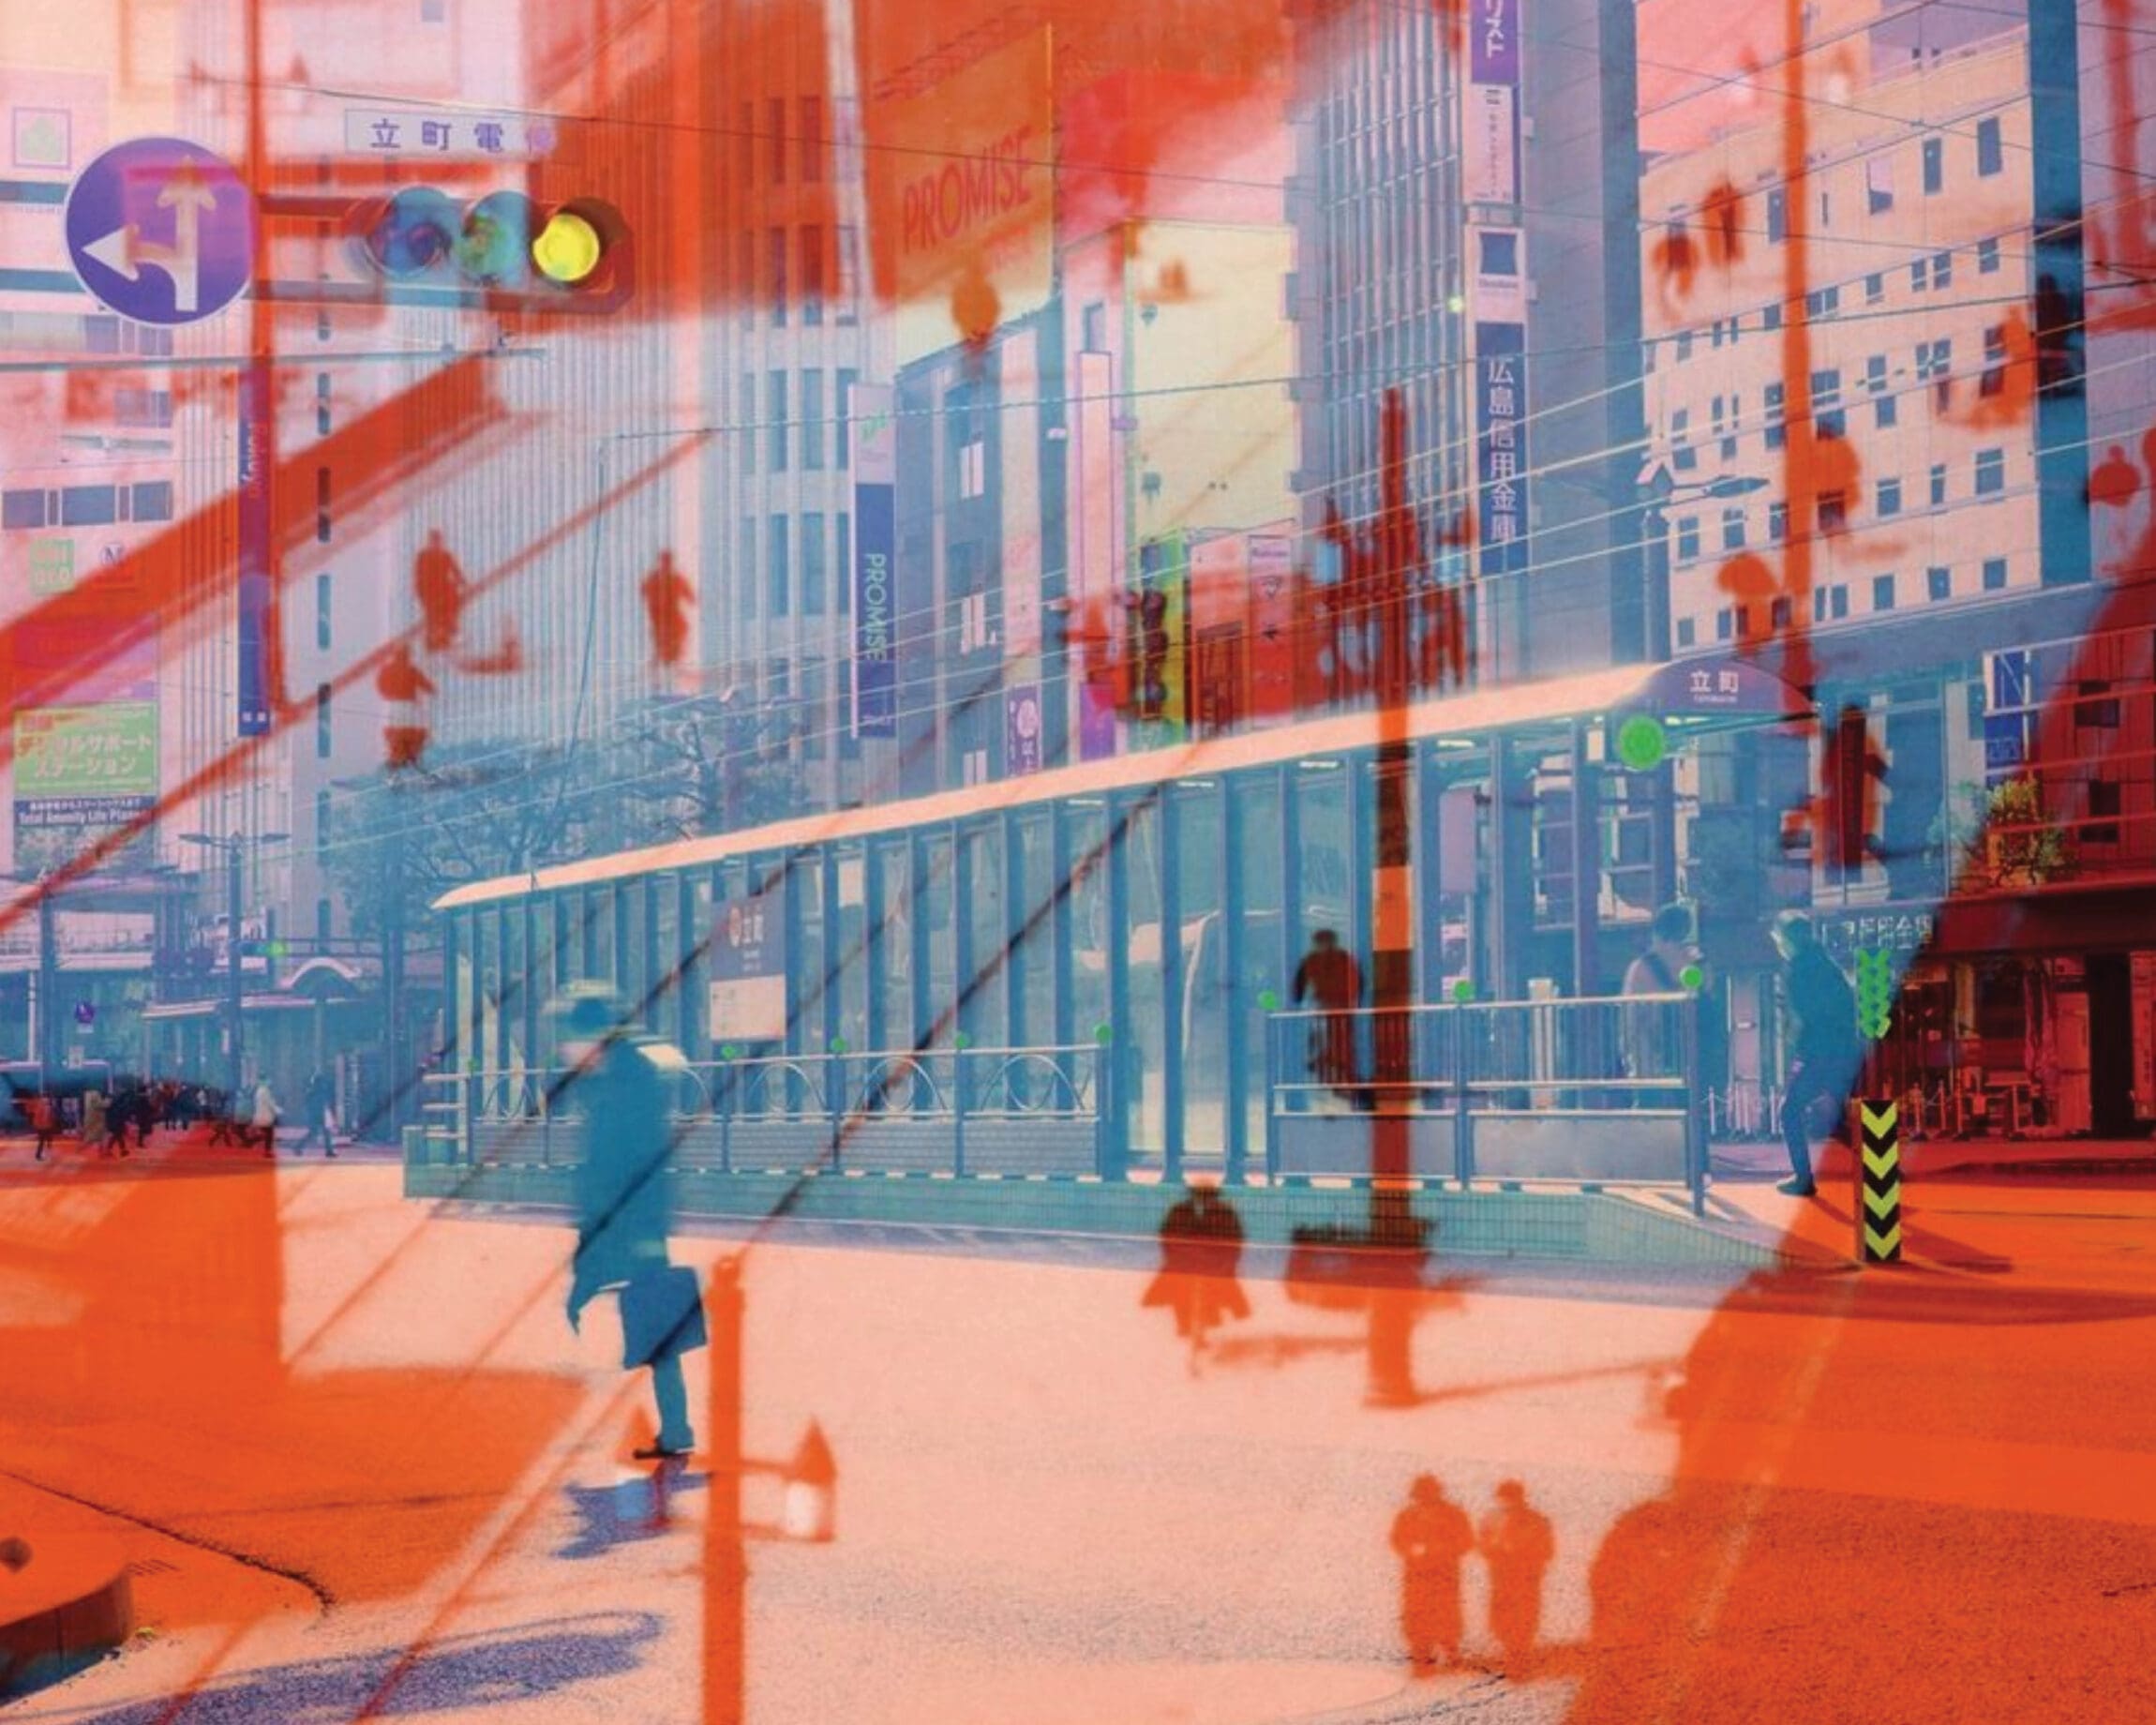 The best galleries in Tokyo | An image in shades of red and blue by Sasaoka Keiko, 2022, courtesy of Tokyo Photographic Art Museum